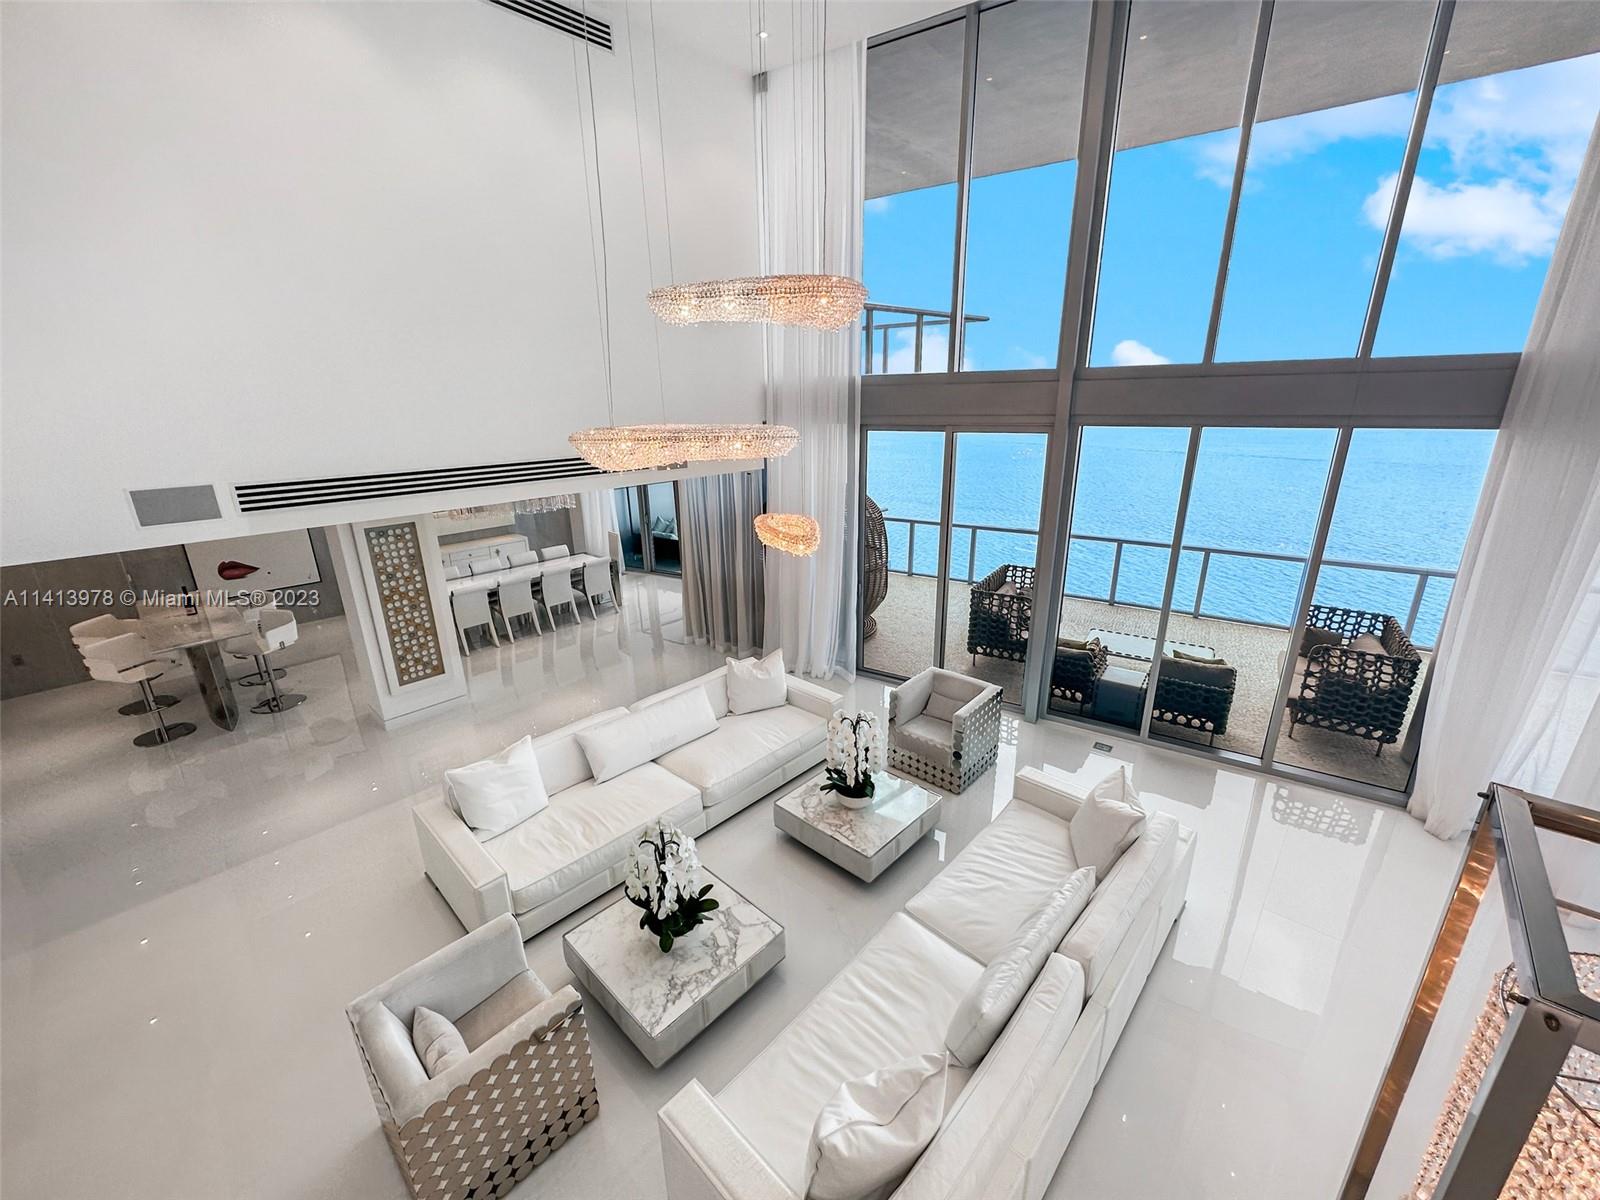 Over 1.5 M in Renovations & Italian Furniture this Two-Story SE Corner PH Boasts Panoramic Ocean & Miami Skyline  Breathtaking Views, 5 Bed/ 5.5 Bath, Total 6157 sq ft (4,490 sq ft interior & 1667 sq ft Expansive Terraces )21-ft Ceilings in Grand Living Area, Temperature controlled 120 Bottles Designed Glass Wine Vault, Complemented by Marble Wine Testing Table next to Formal Dining Area, Modern  Floating Staircase, Elegance & Opulence prevail. Renovated with Meticulous Attention to Detail, this Residence features an Eat-in custom-made Kitchen, Premium Appliances flowing seamlessly into the Family area & TV room. Oversized wrapped-around Terraces. Recently Renovated  Luxury 5-star Amenities: Sunrise & Sunset pool,Full Menu Restaurant , Spa & Gym, Pool & Beach Service, Kids room, Consierge.